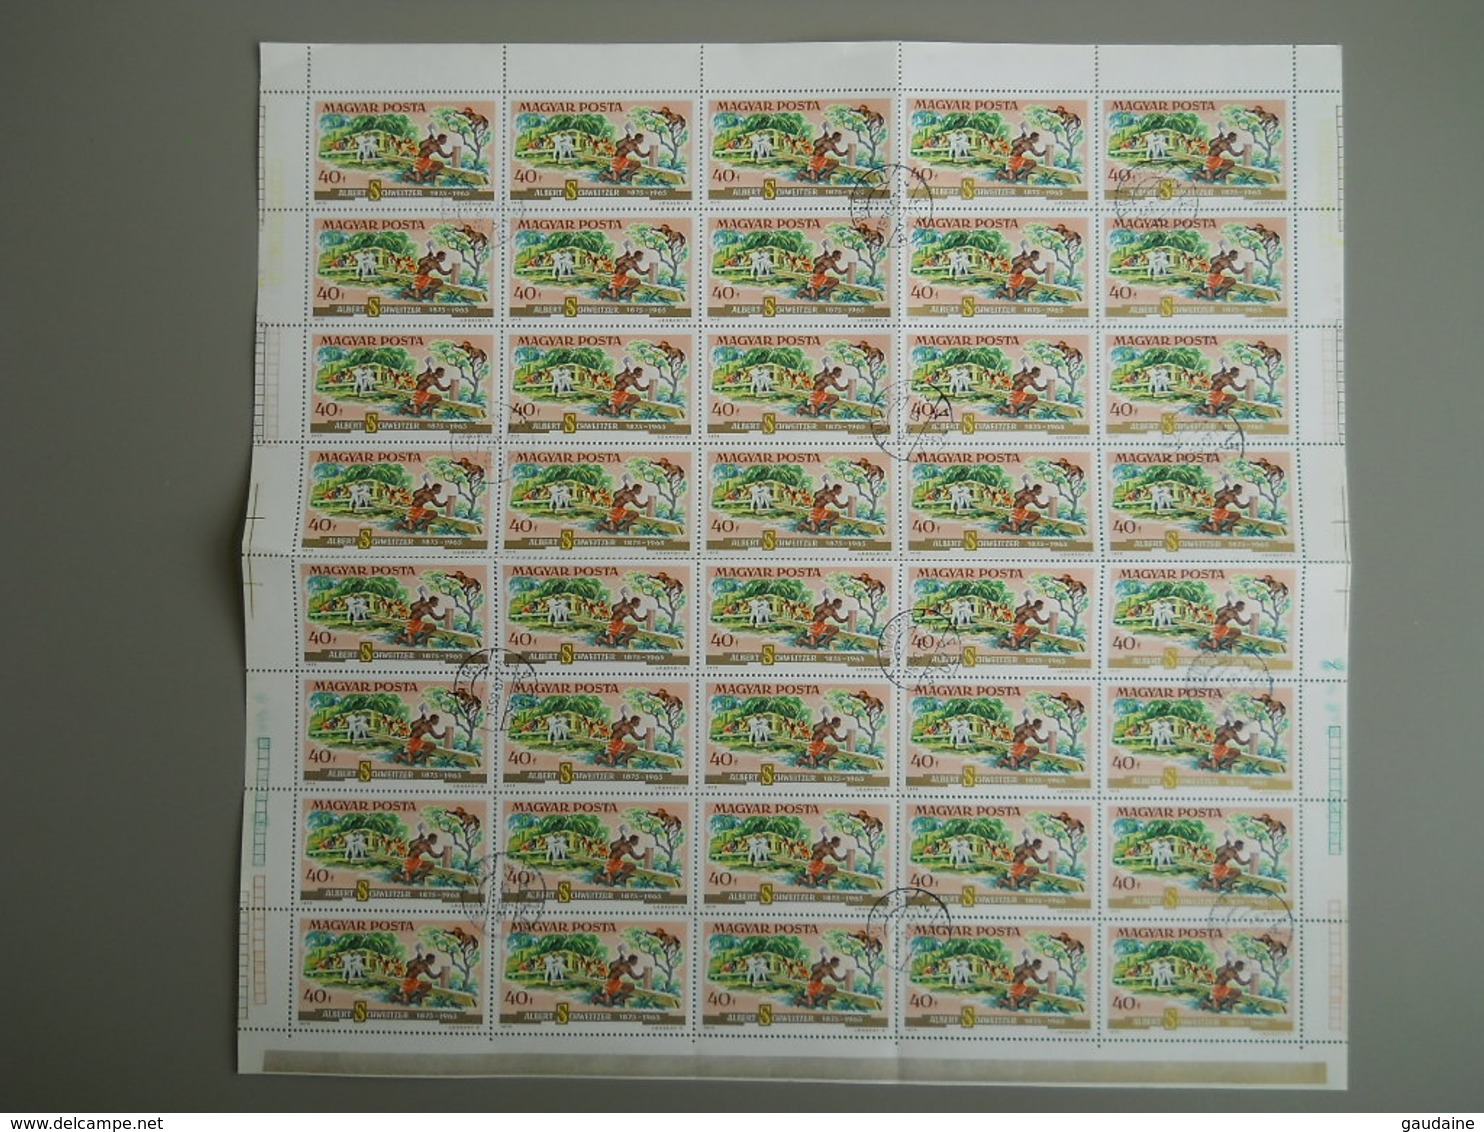 HONGRIE - HUNGARY - FULL SHEET , FEUILLE COMPLETE OBLITERE  - 1975 1976 - Emisiones Locales